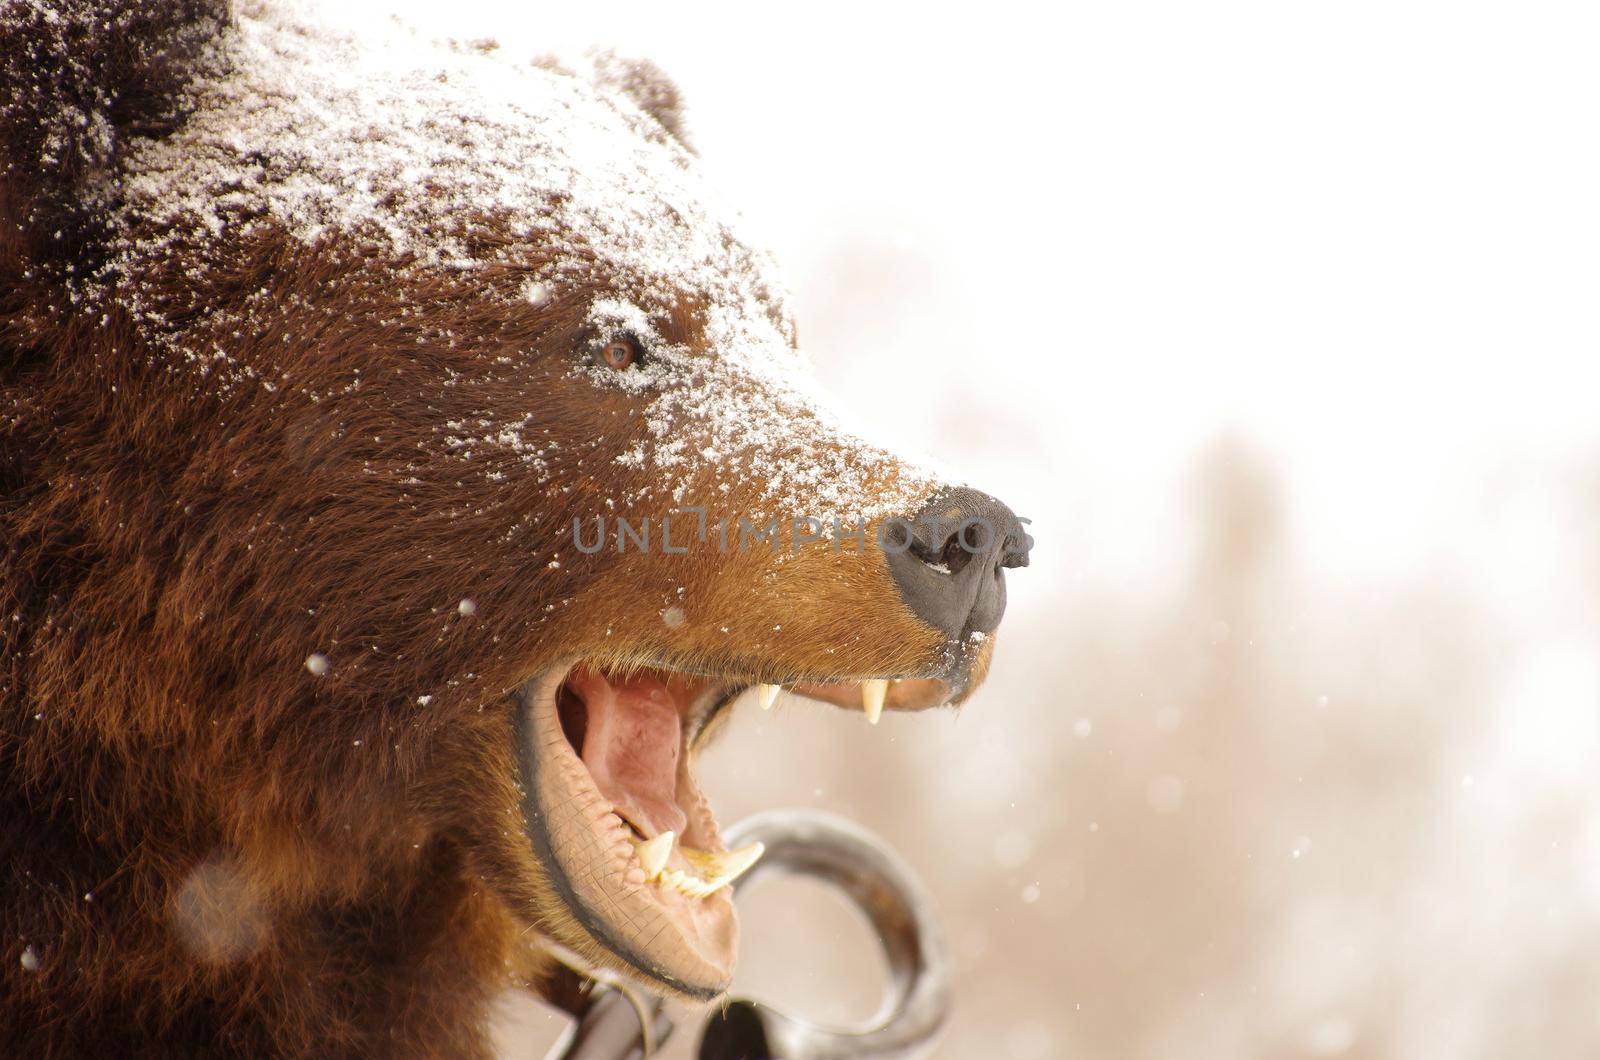 A stuffed brown bear with an open mouth on a city street during a snowfall